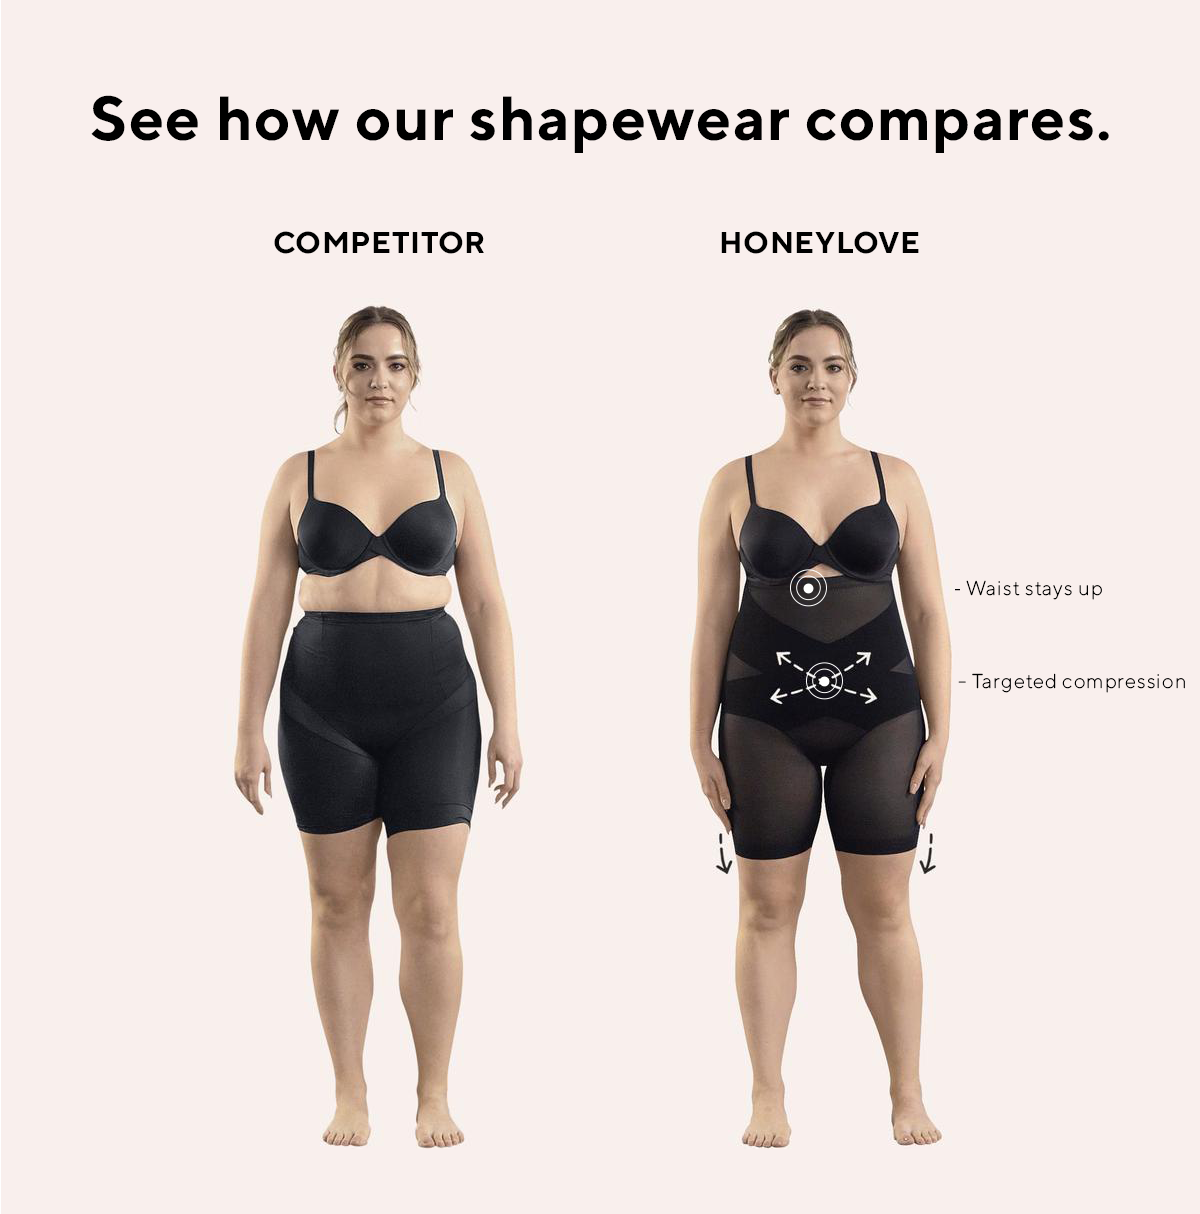 Honeylove shapewear before and after pictures